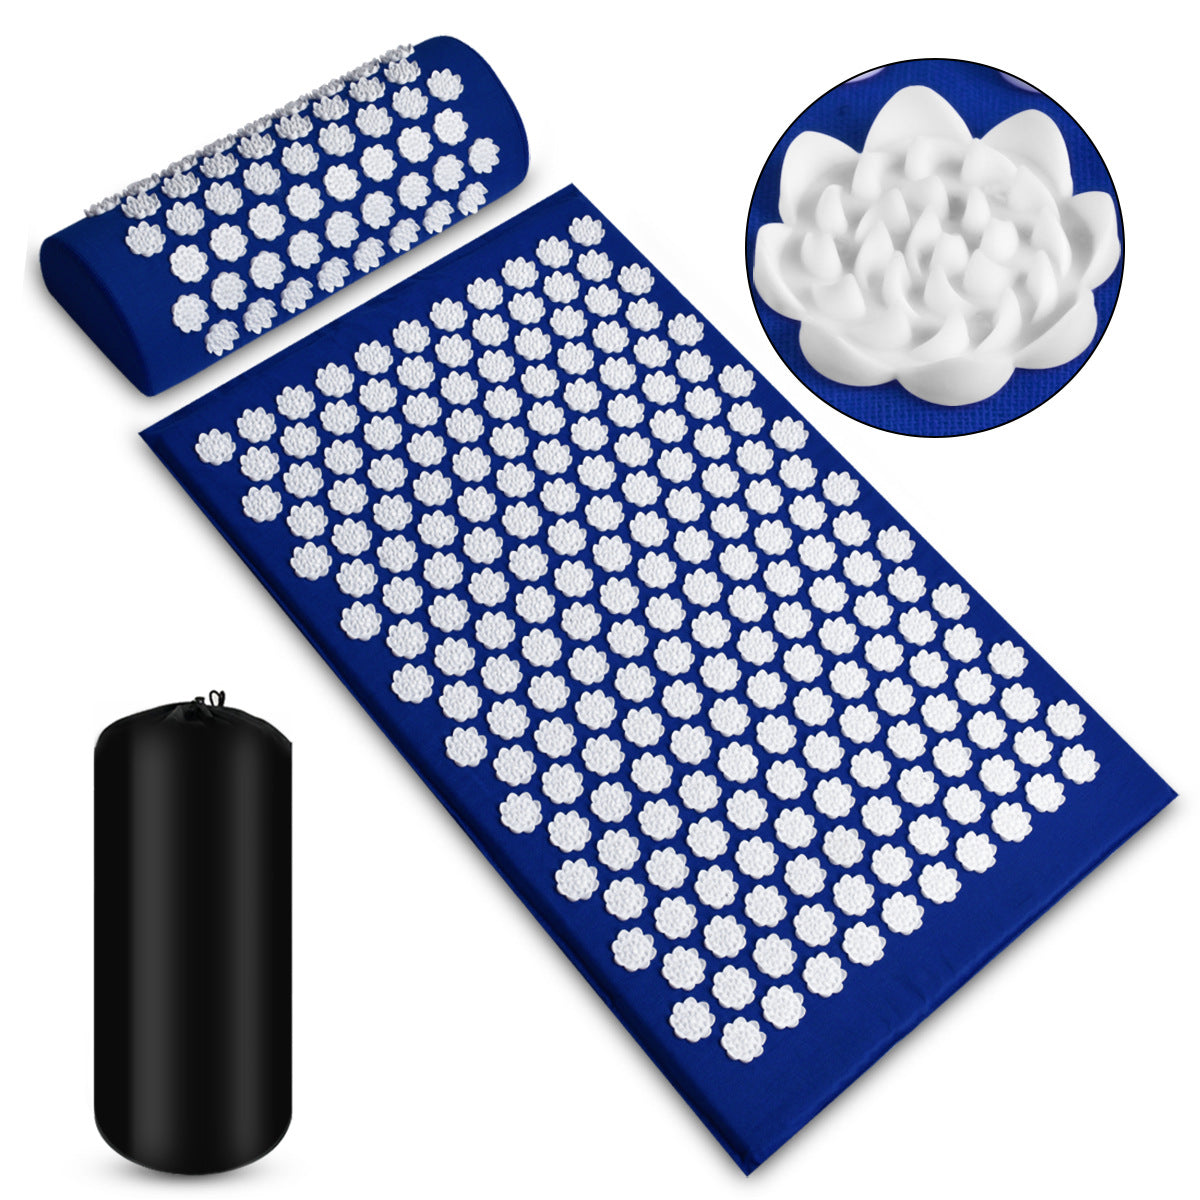 Blue Acupressure Mat with gentle white lotus, set comes with body mat, neck pillow, carrying bag - pain gates theory, pain relief, acupressure